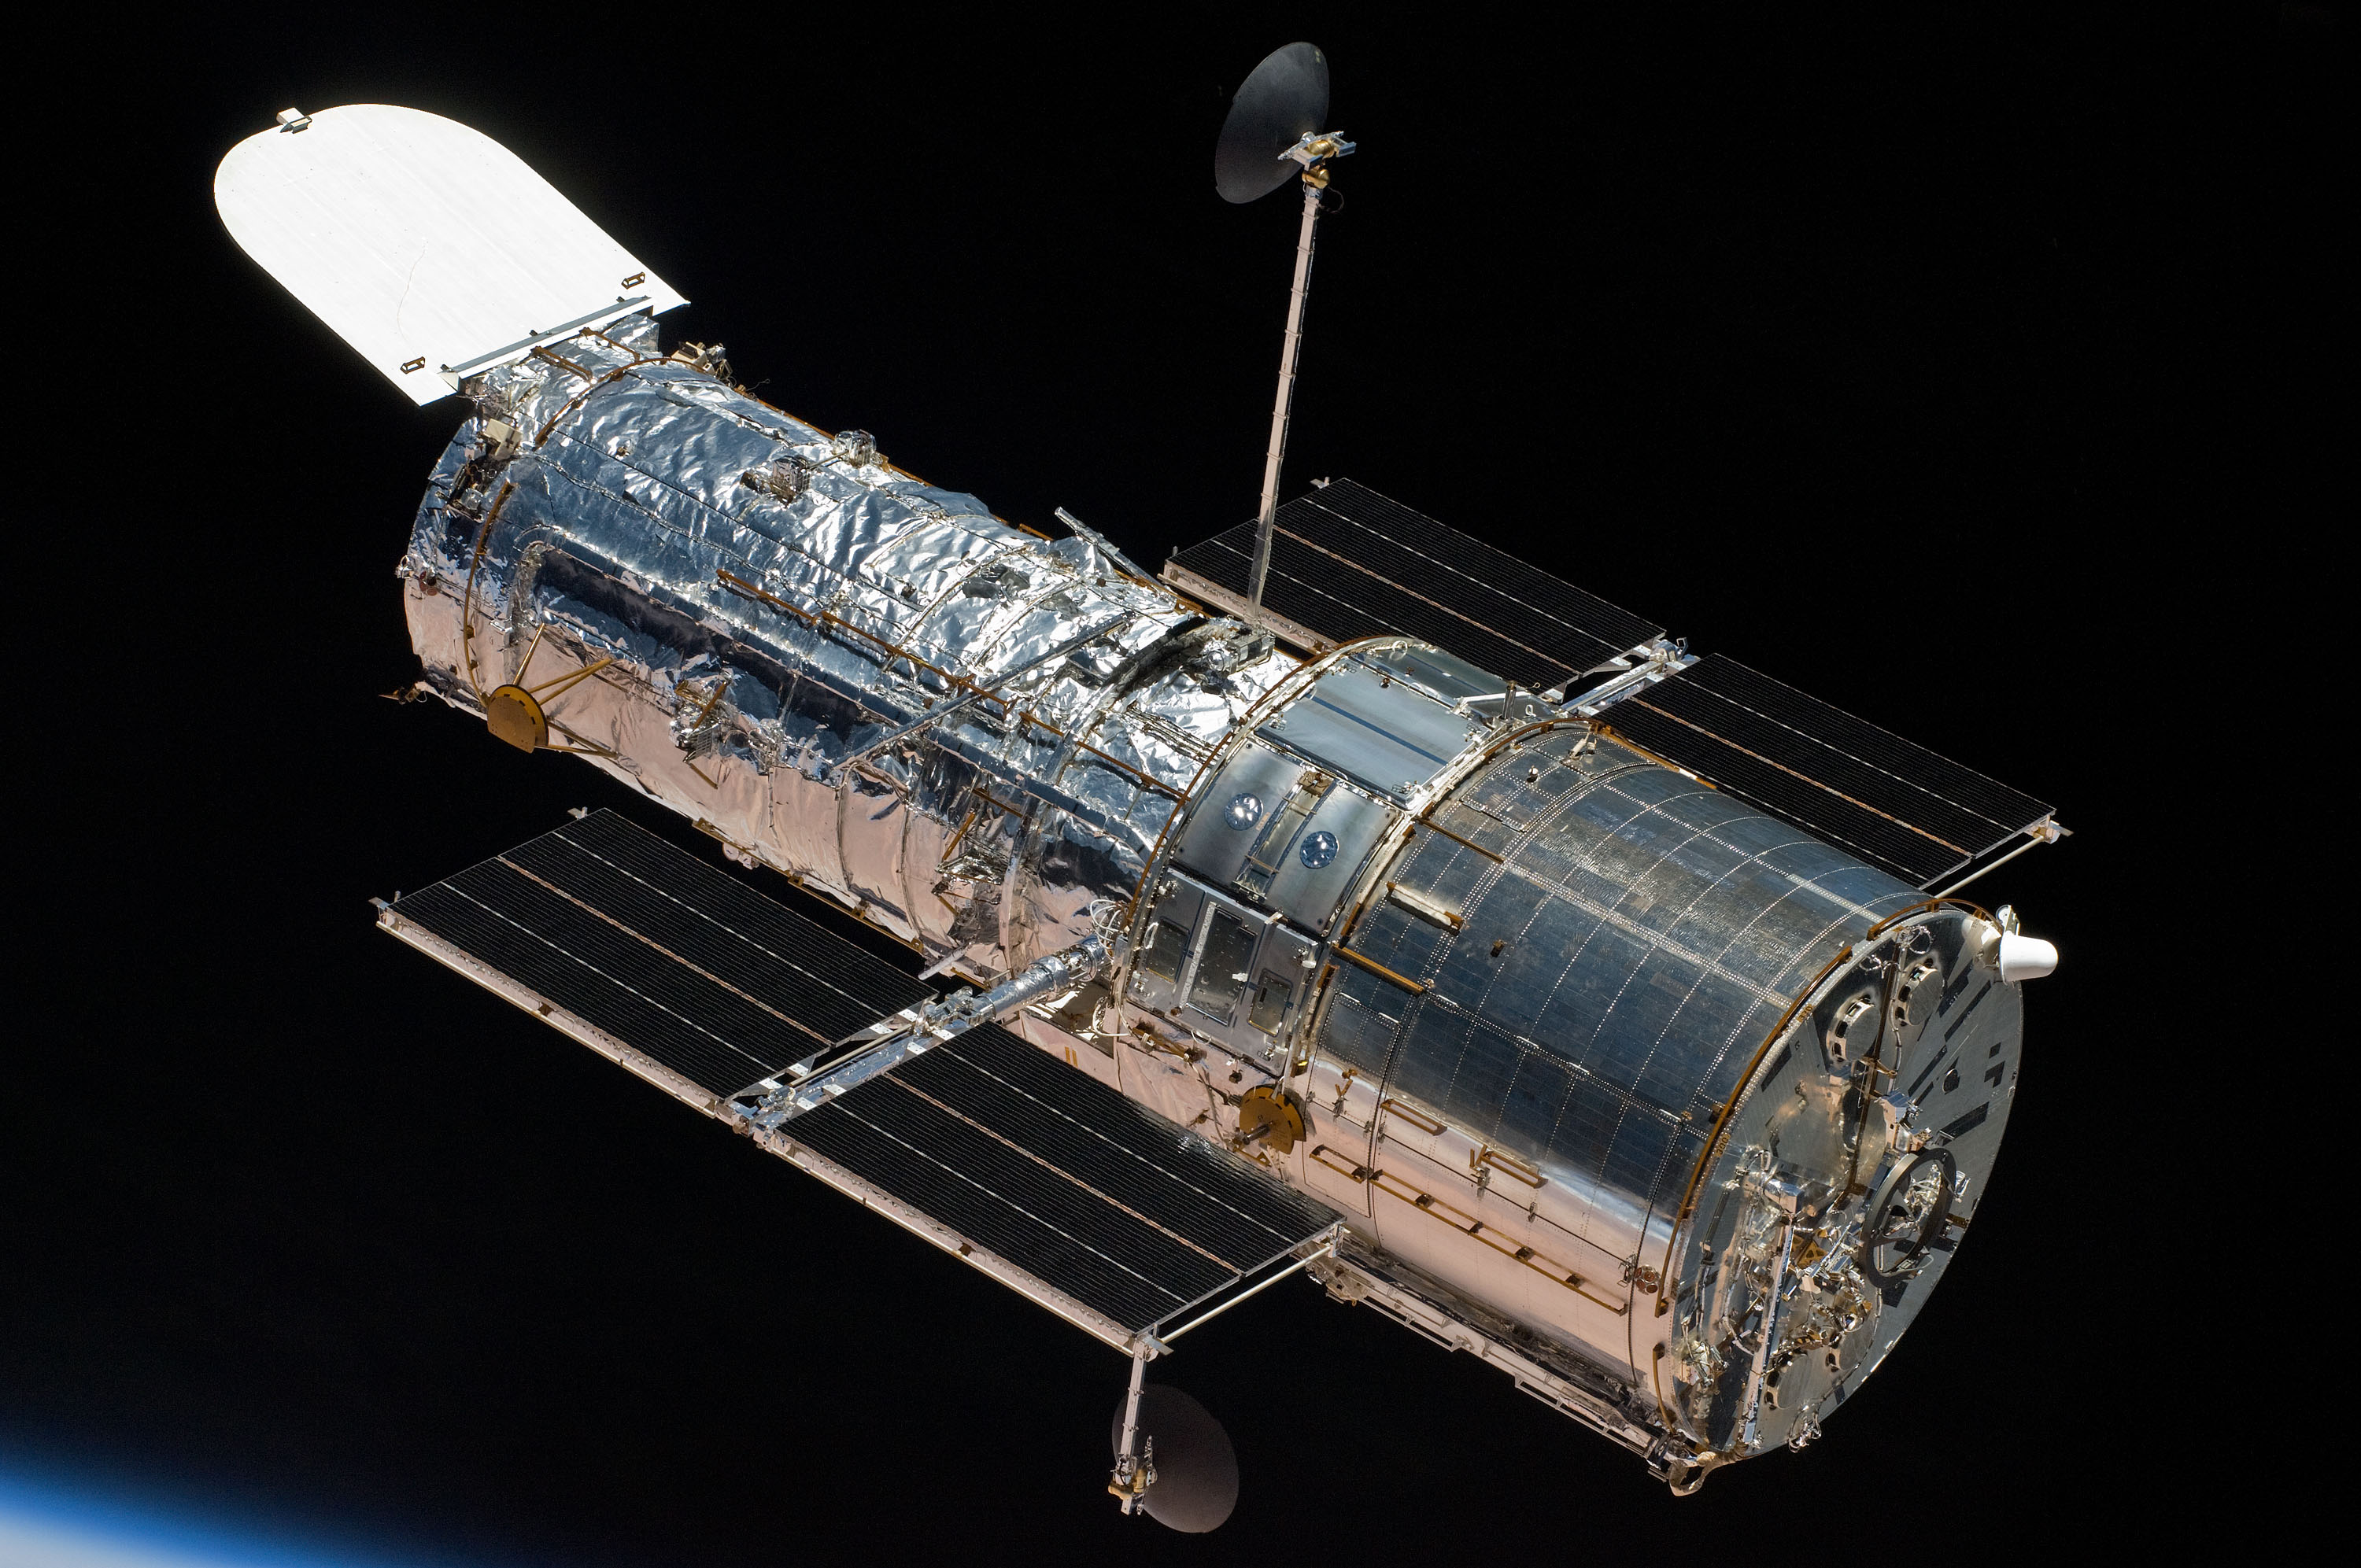 Hubble Space Telescope against the blackness of space